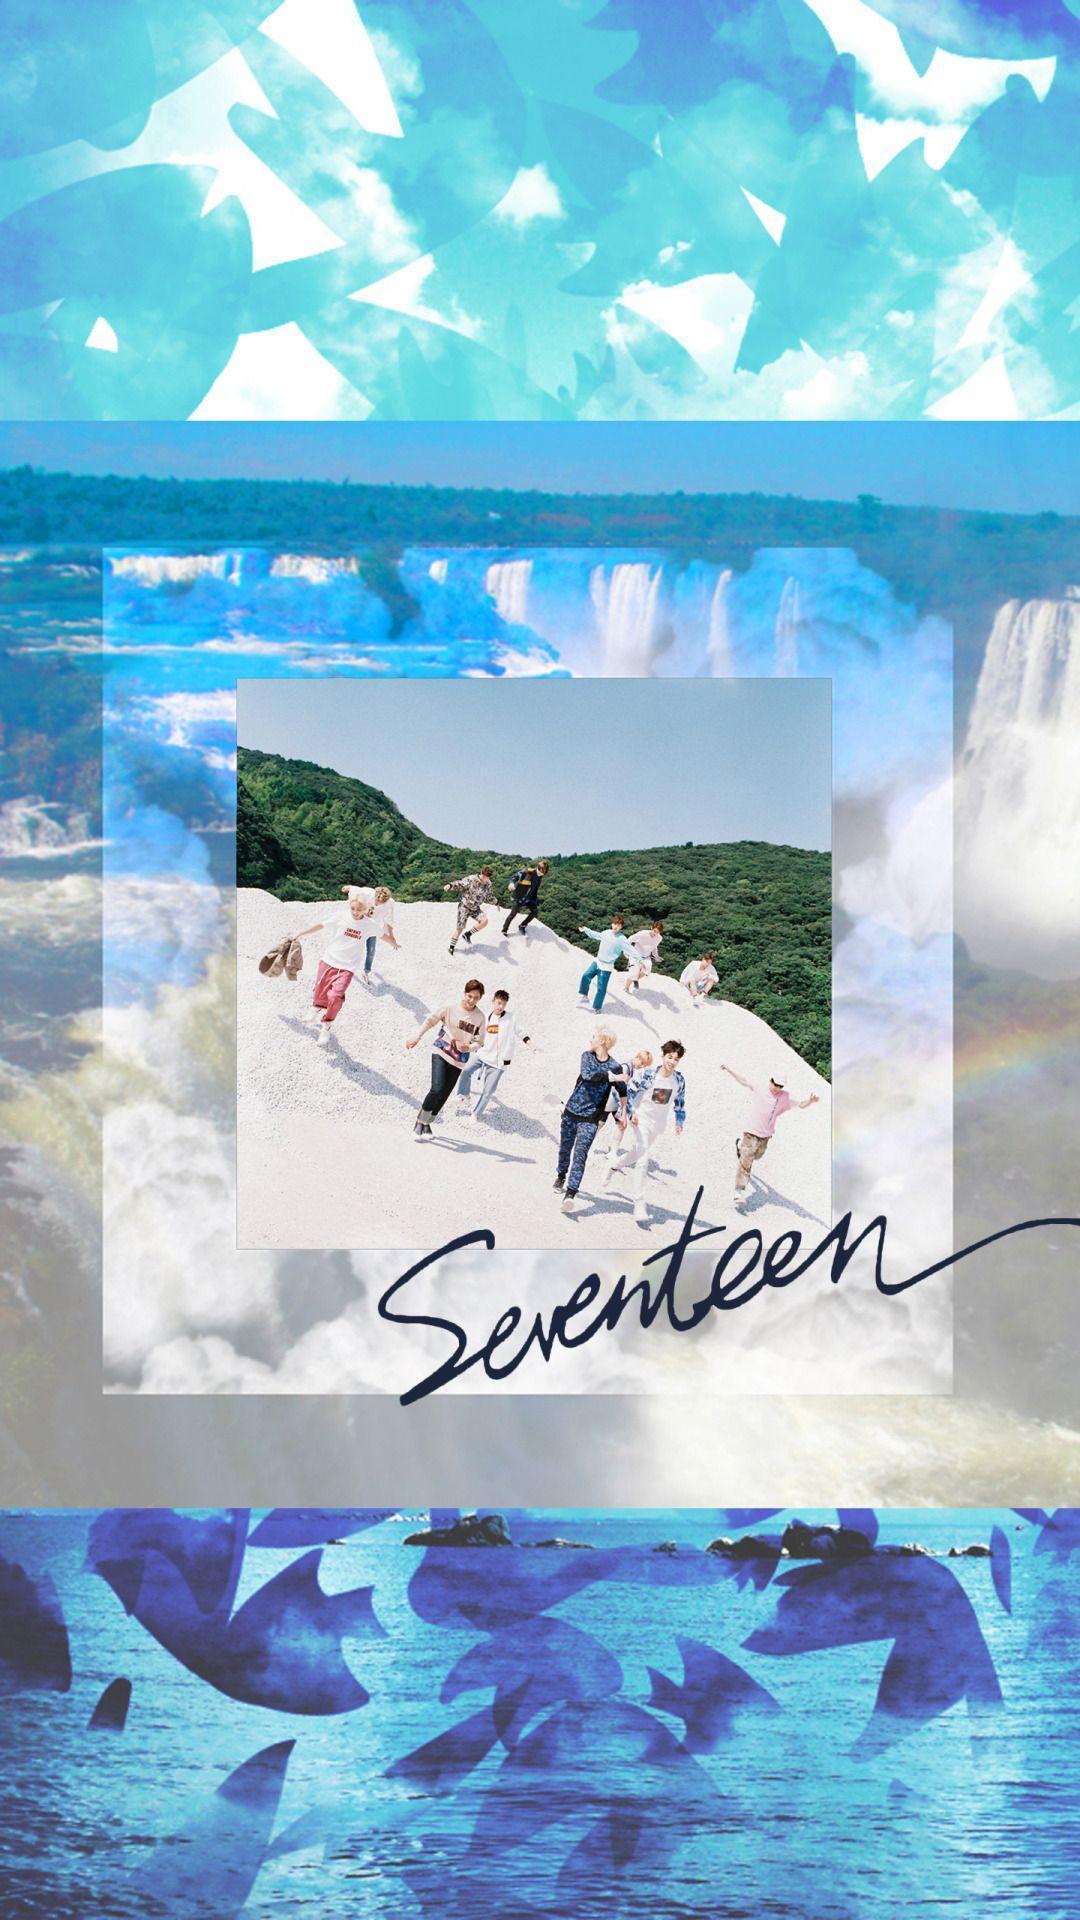 17 Best image about ✩SEVENTEEN✩